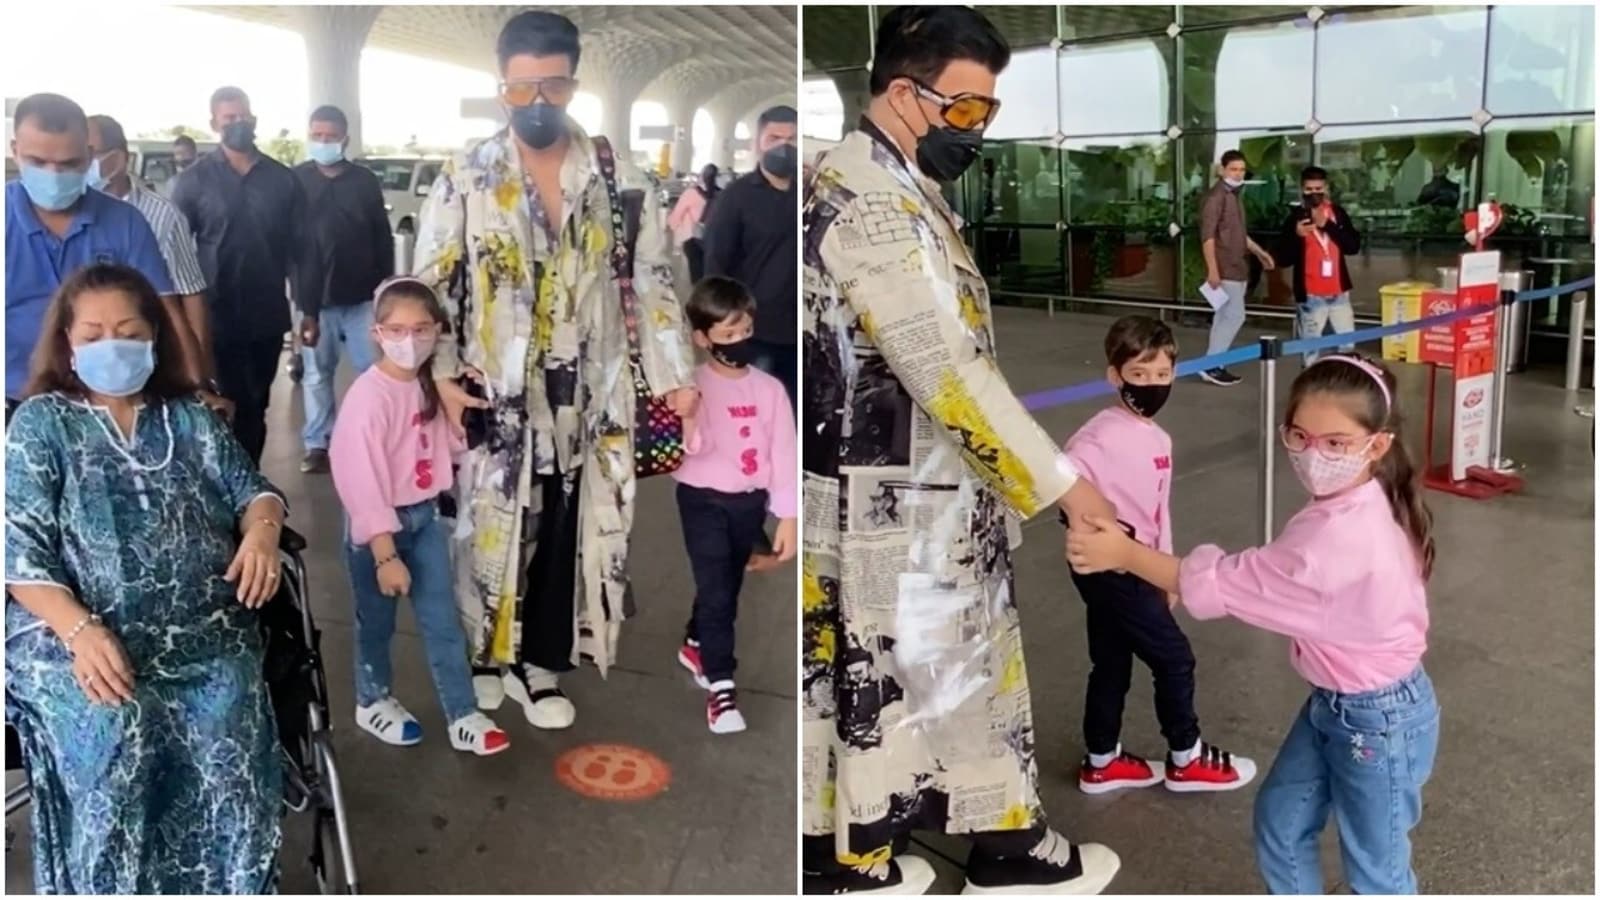 Karan Johar leaves for vacation with kids Roohi and Yash, and mom Hiroo Johar, fans call them a 'cute family'. Watch